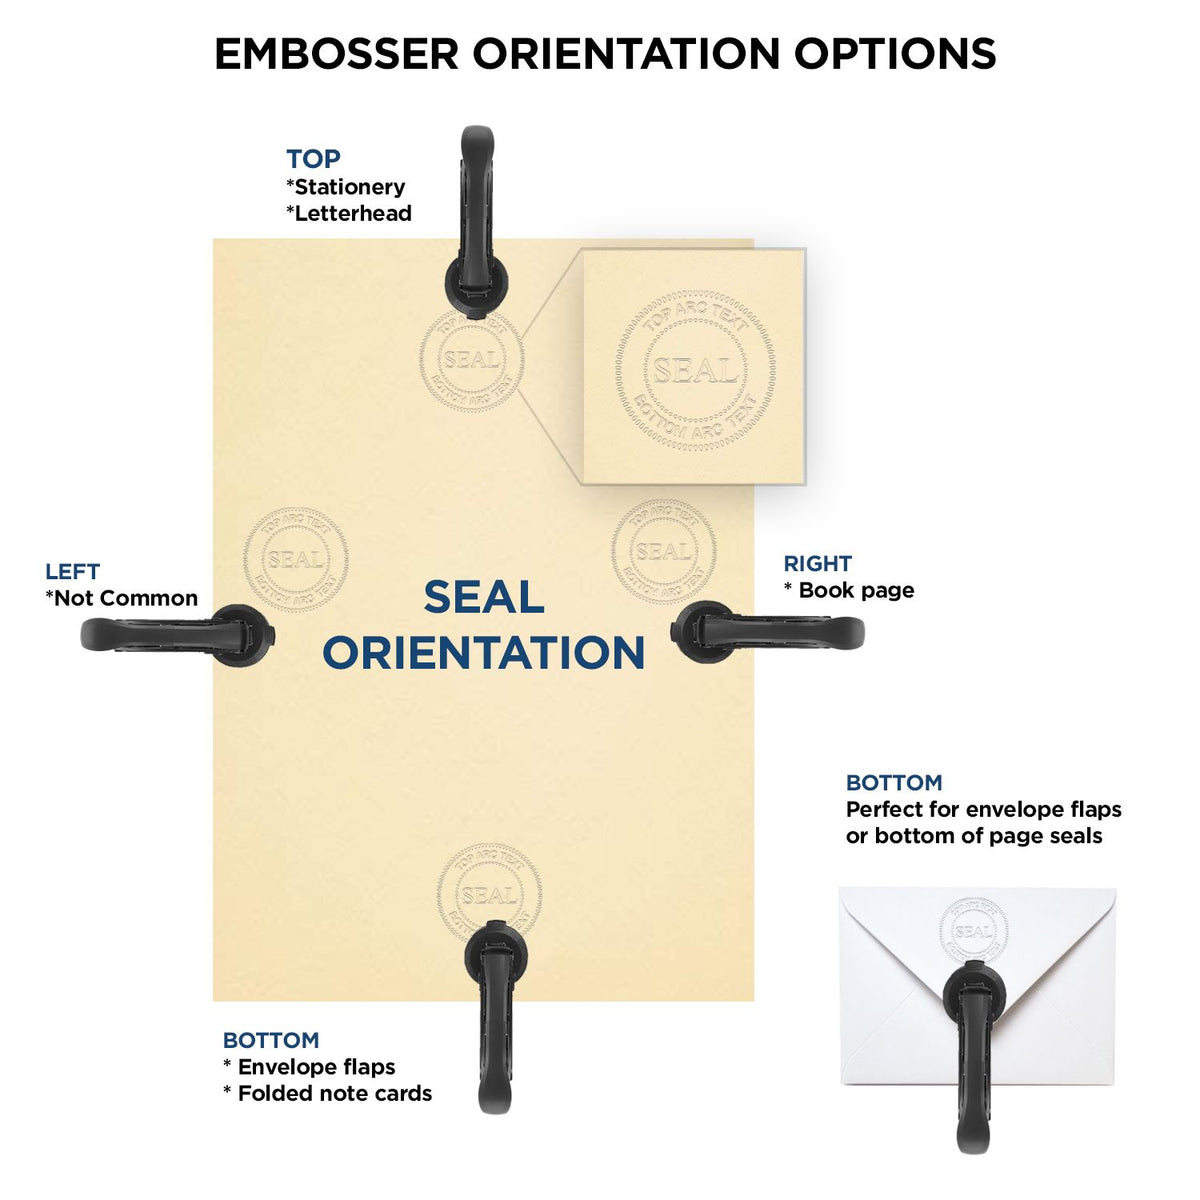 An infographic for the Heavy Duty Cast Iron Wisconsin Geologist Seal Embosser showing embosser orientation, this is showing examples of a top, bottom, right and left insert.